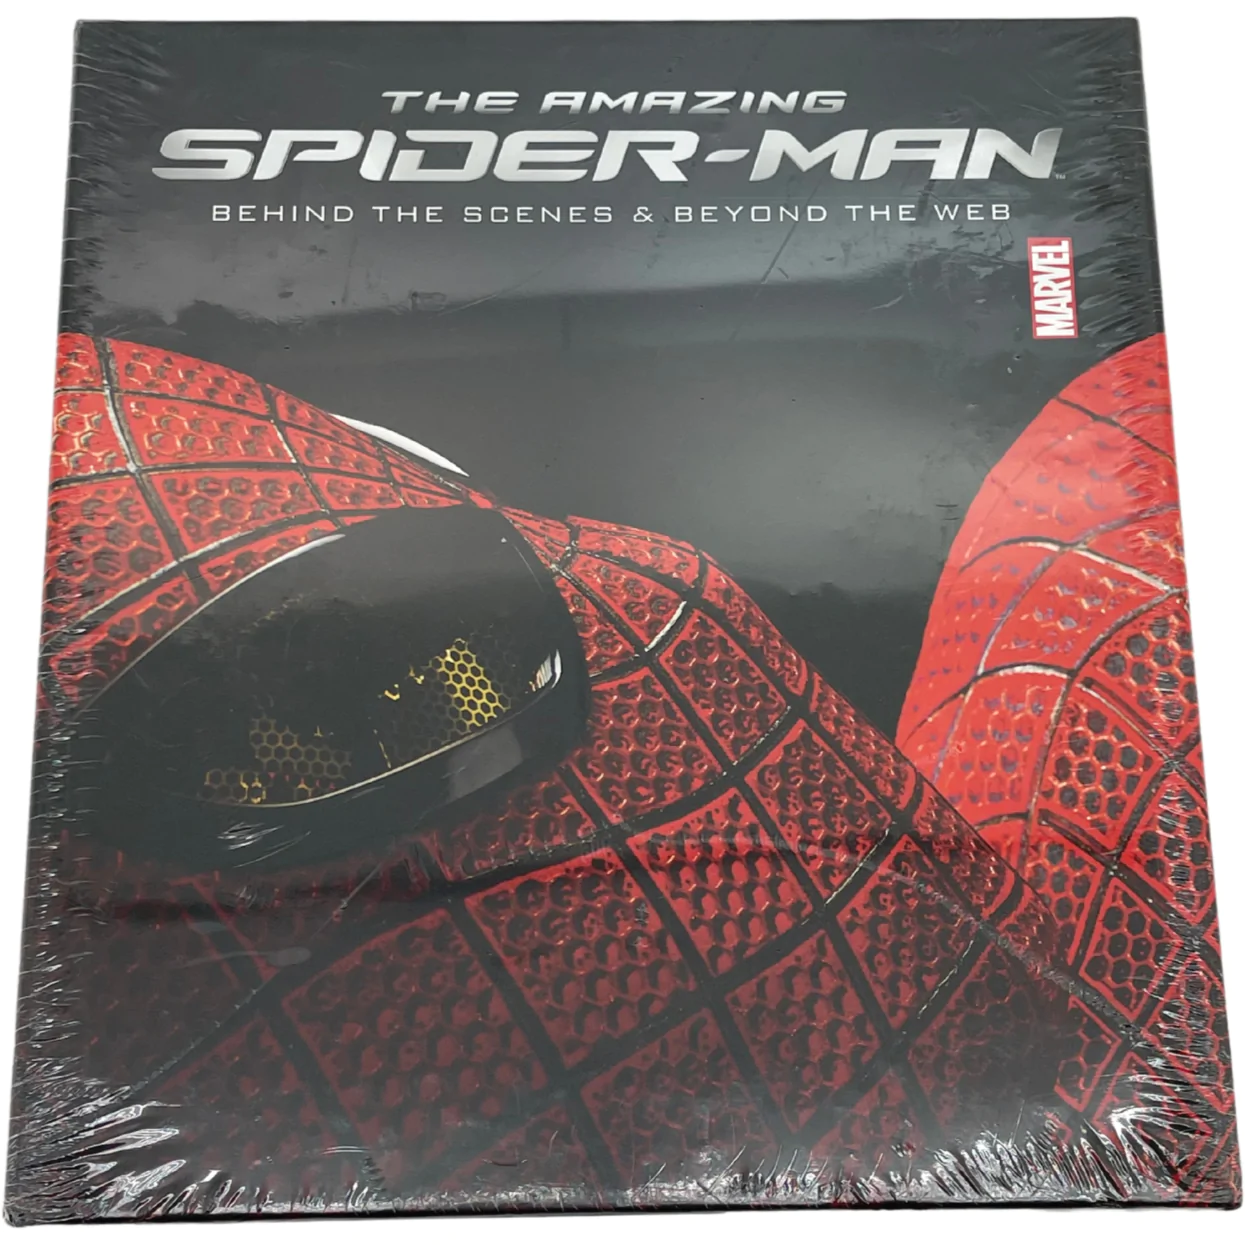 Marvel Spider-Man Coffee Table Book / Hardcover / "The Amazing Spider-Man: Behind The Scenes & Beyond The Web"